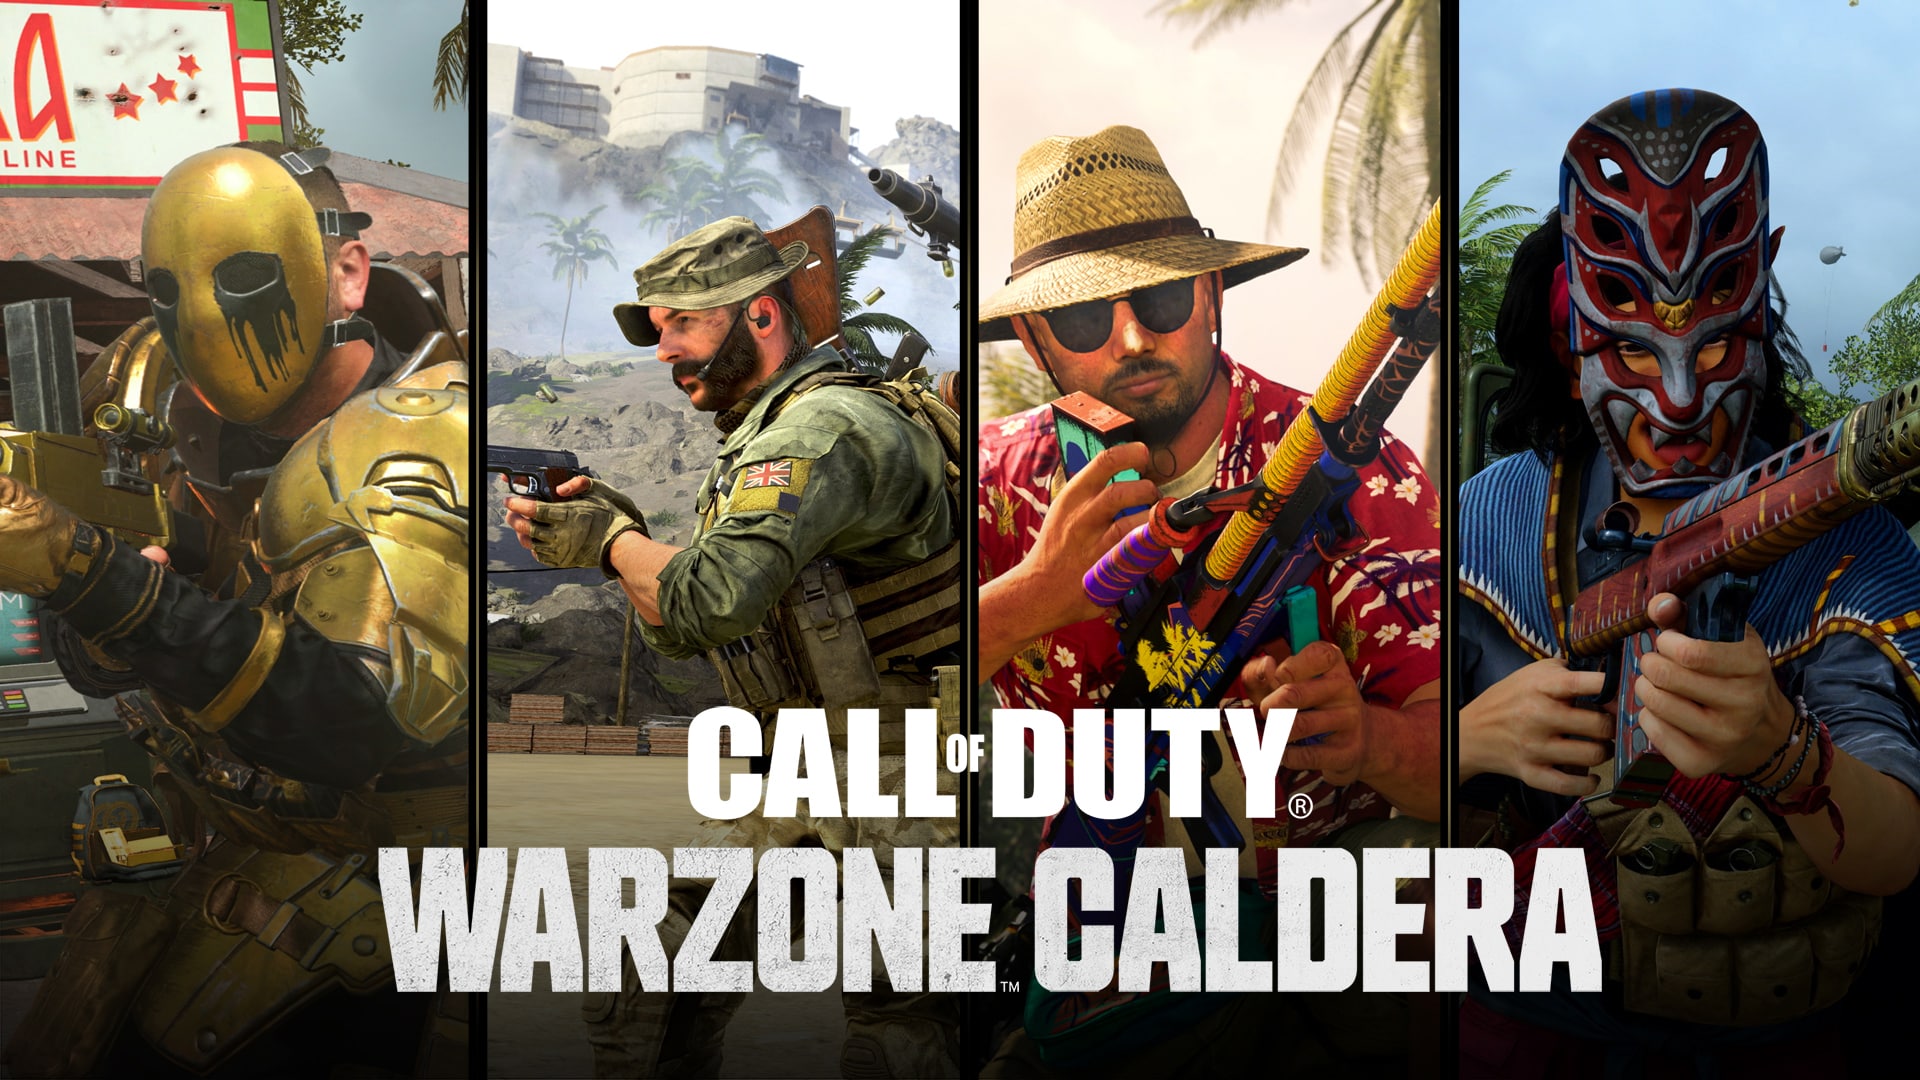 Call of Duty: Warzone Caldera is now available